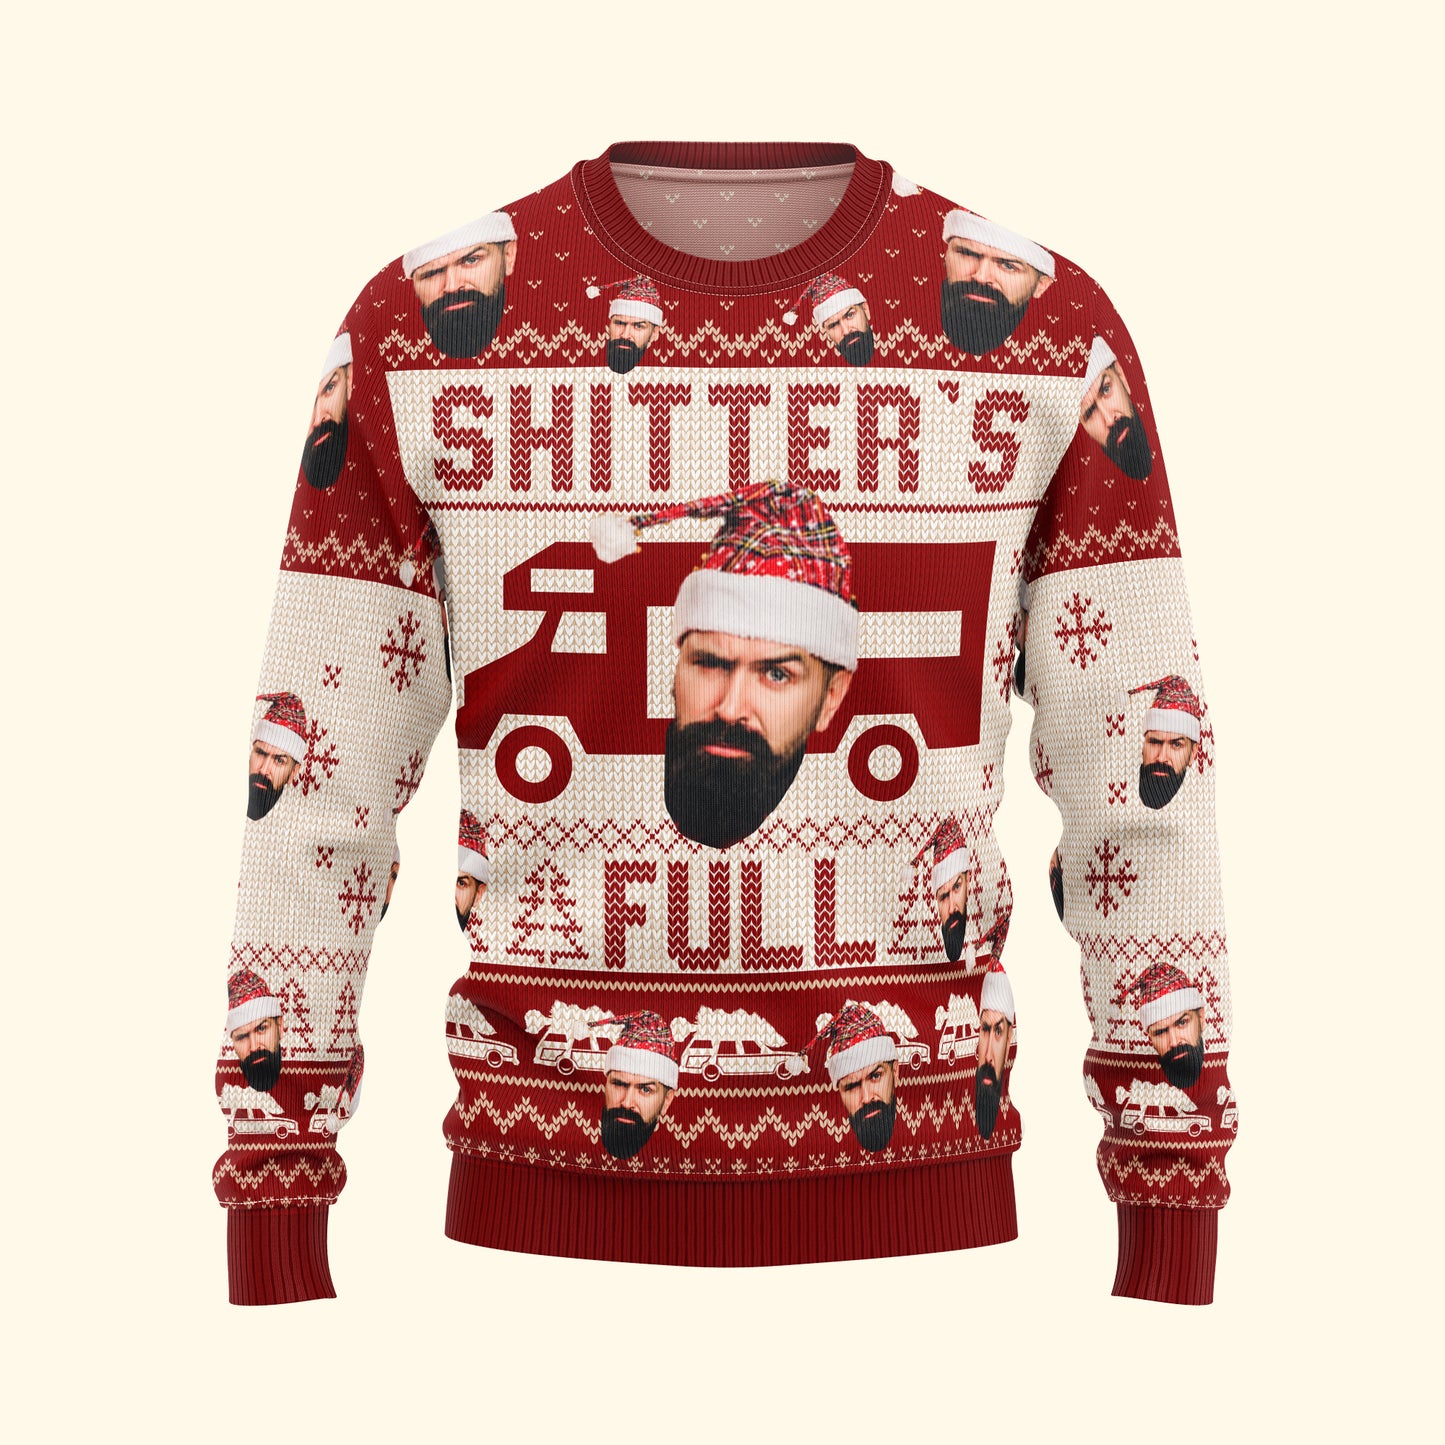 Merry Christmas Sh!*ter's Full - Personalized Photo Ugly Christmas Sweater